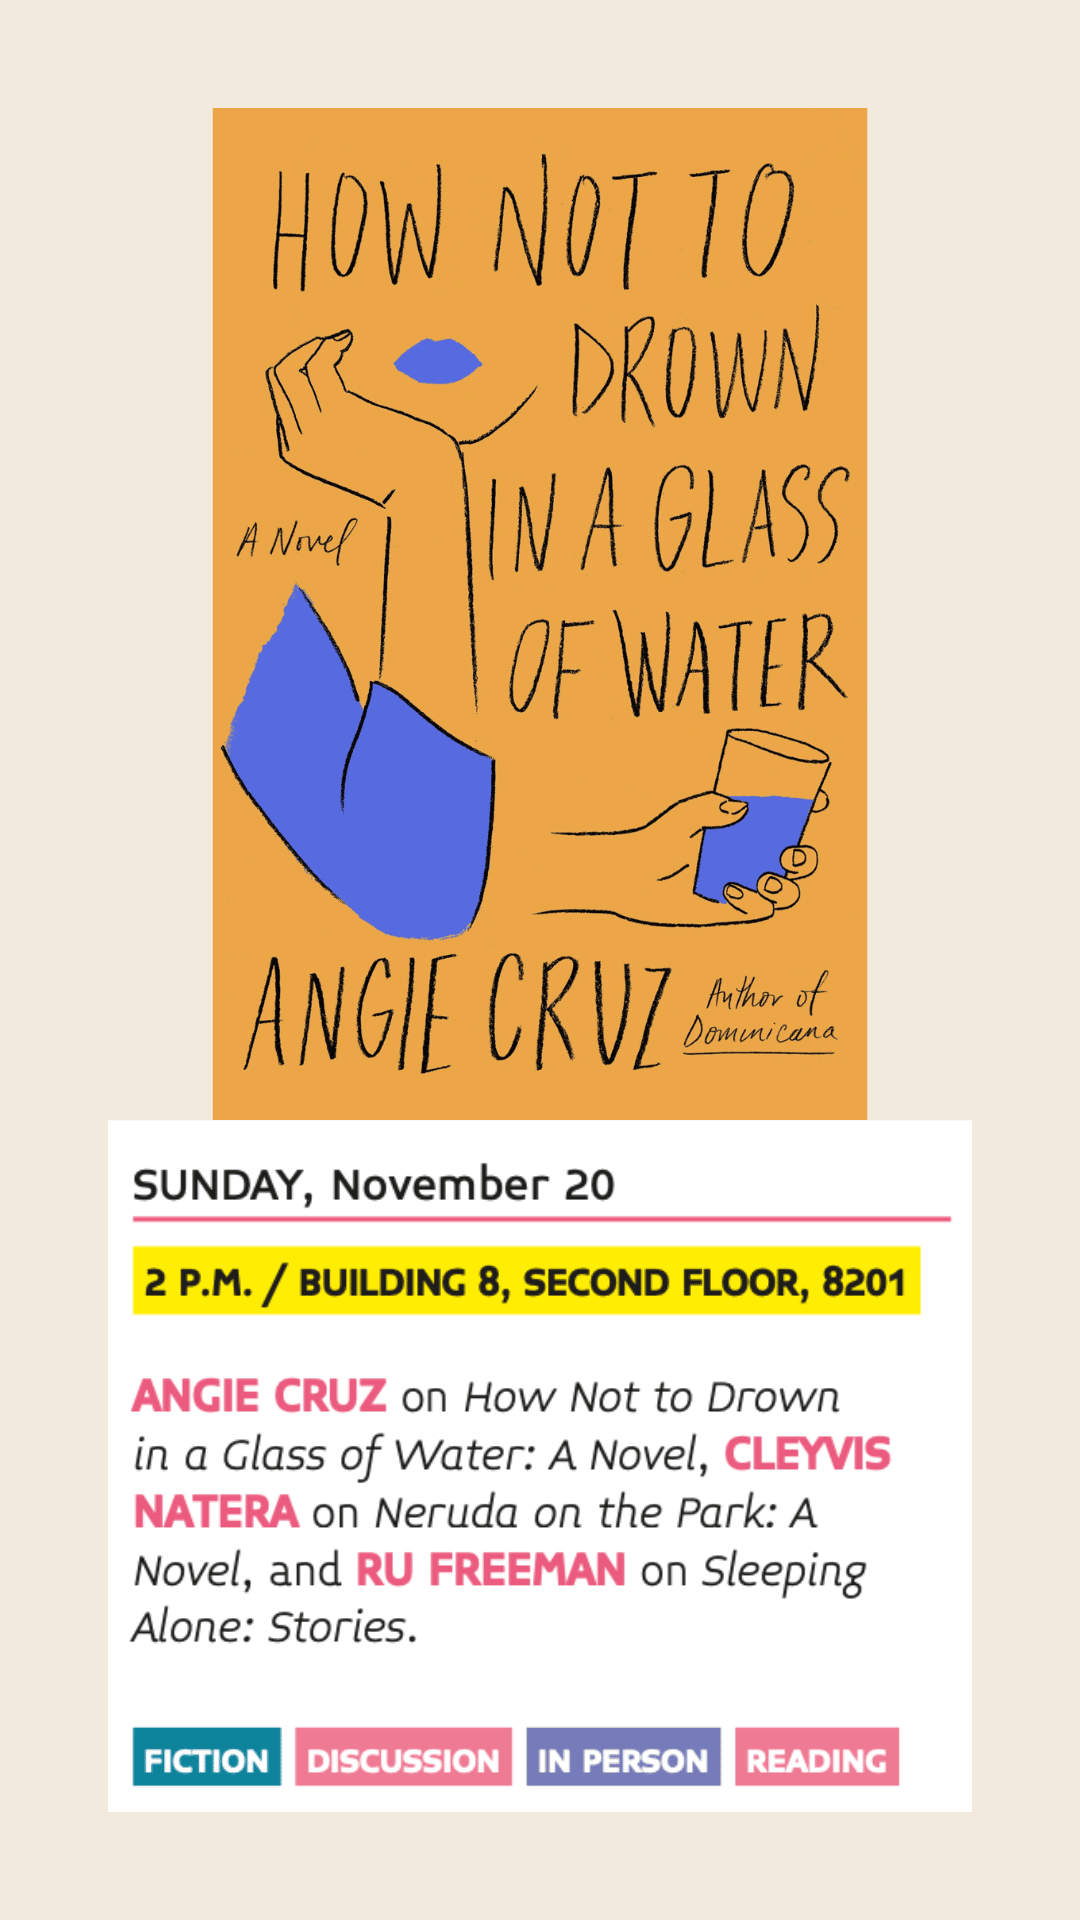 Miami Book Fair 2022 - Angie Cruz, how not to drown in a glass of water